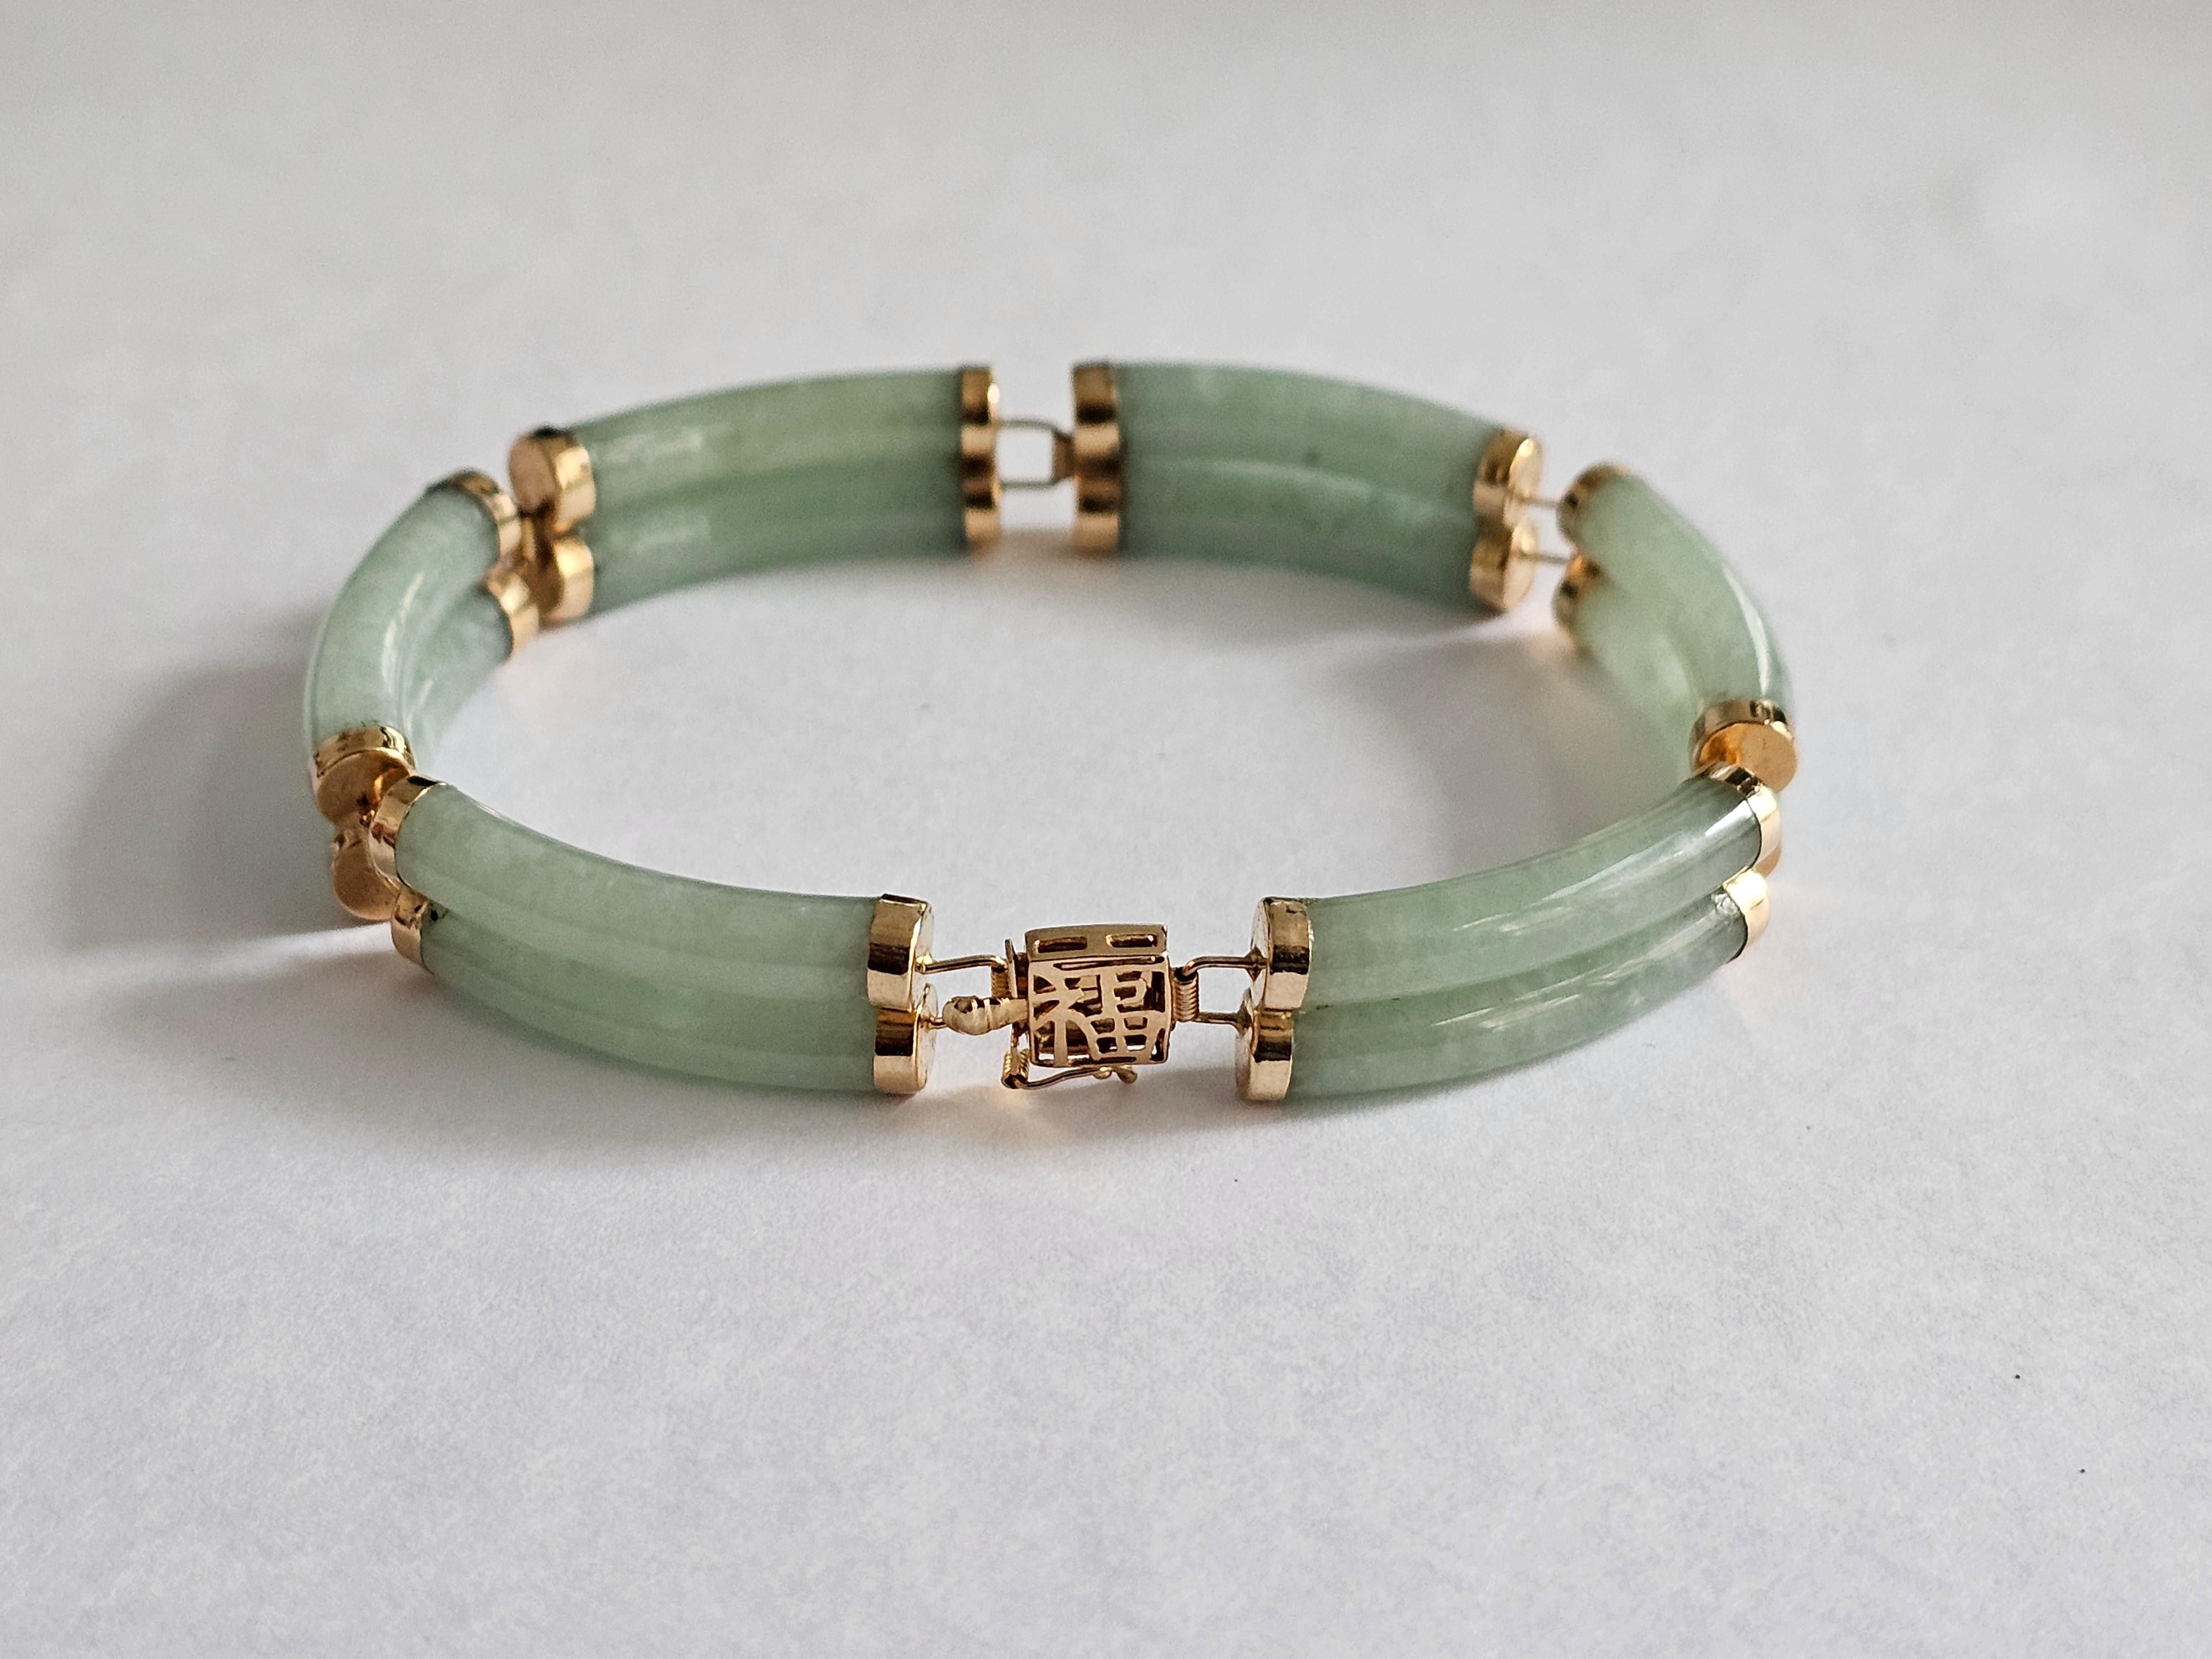 Cabochon Fortune A-Jade Bracelet Double Bars with 14K Solid Yellow Gold links and clasp For Sale